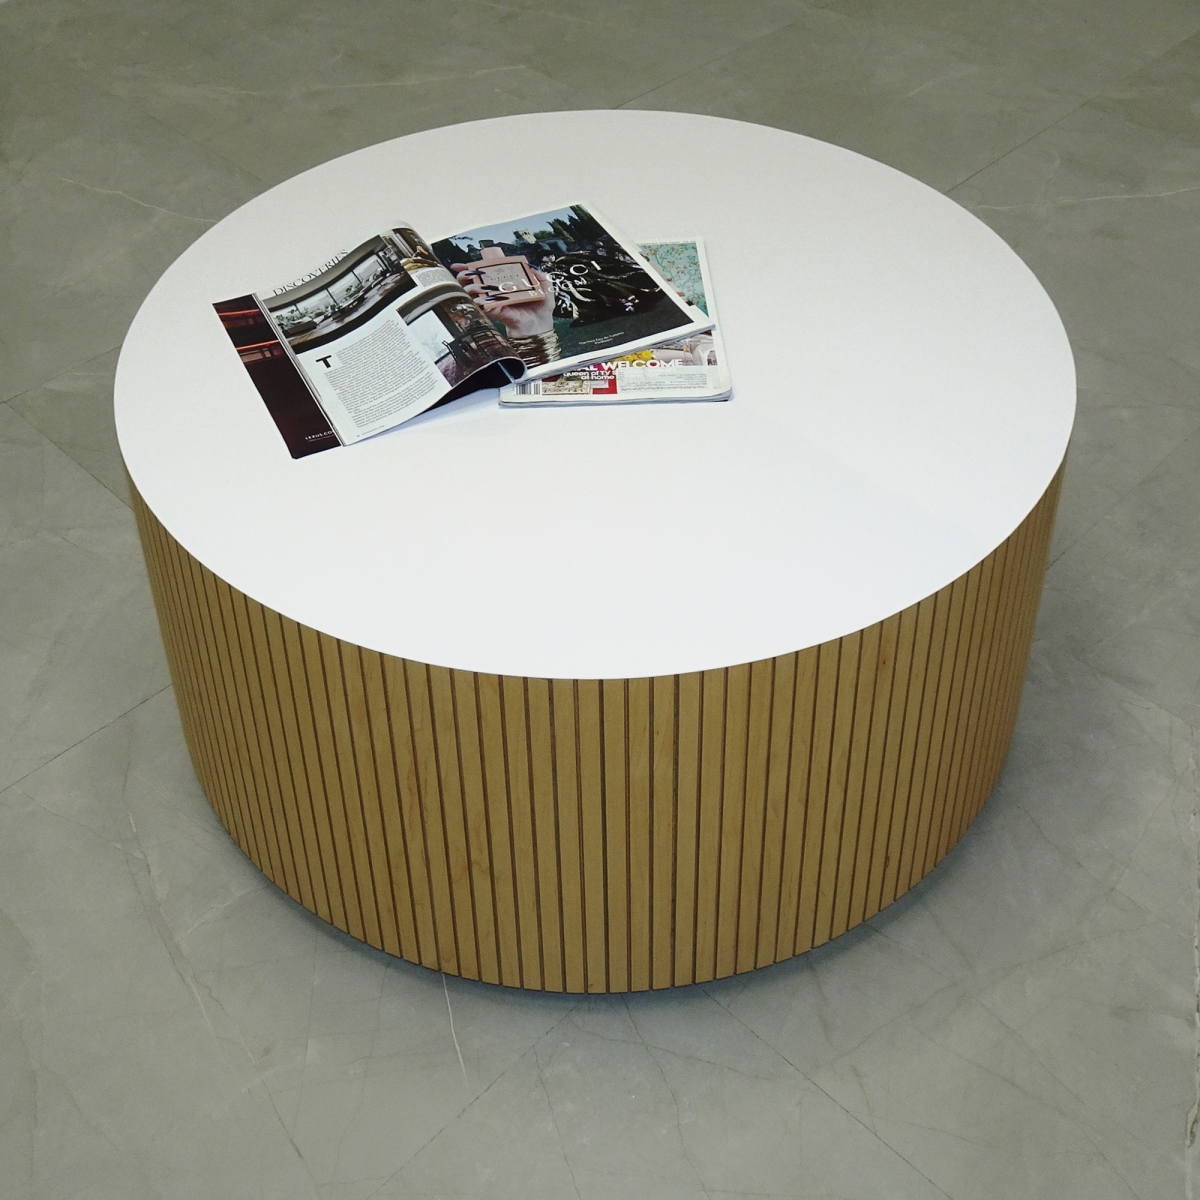 36 in. Axis Round Coffee Table - Stock # 1001-S